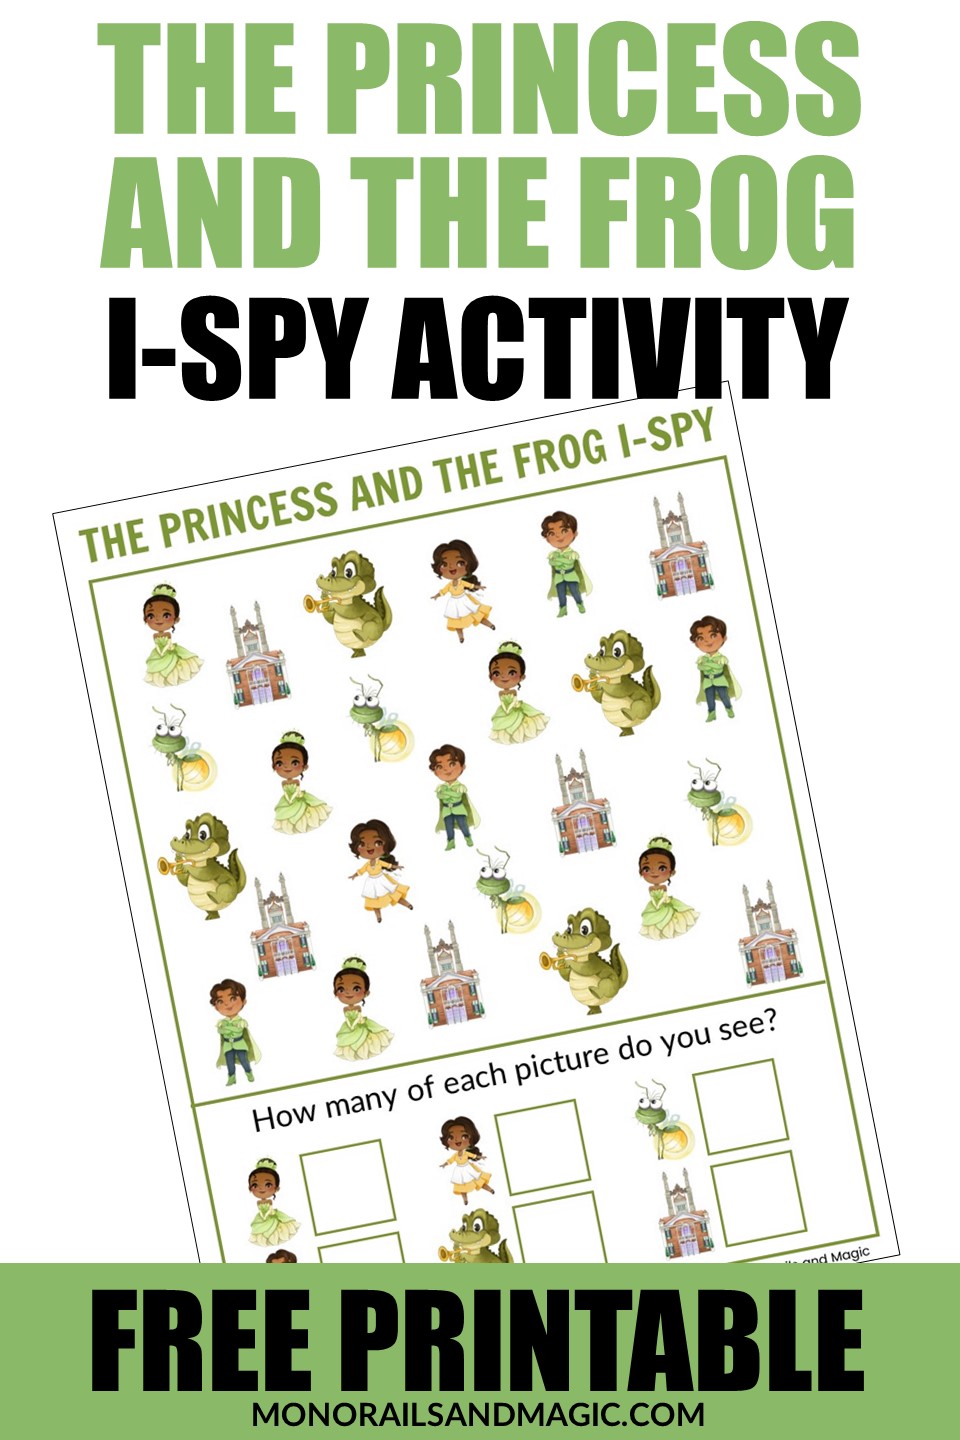 Free printable The Princess and the Frog I-Spy activity for kids.